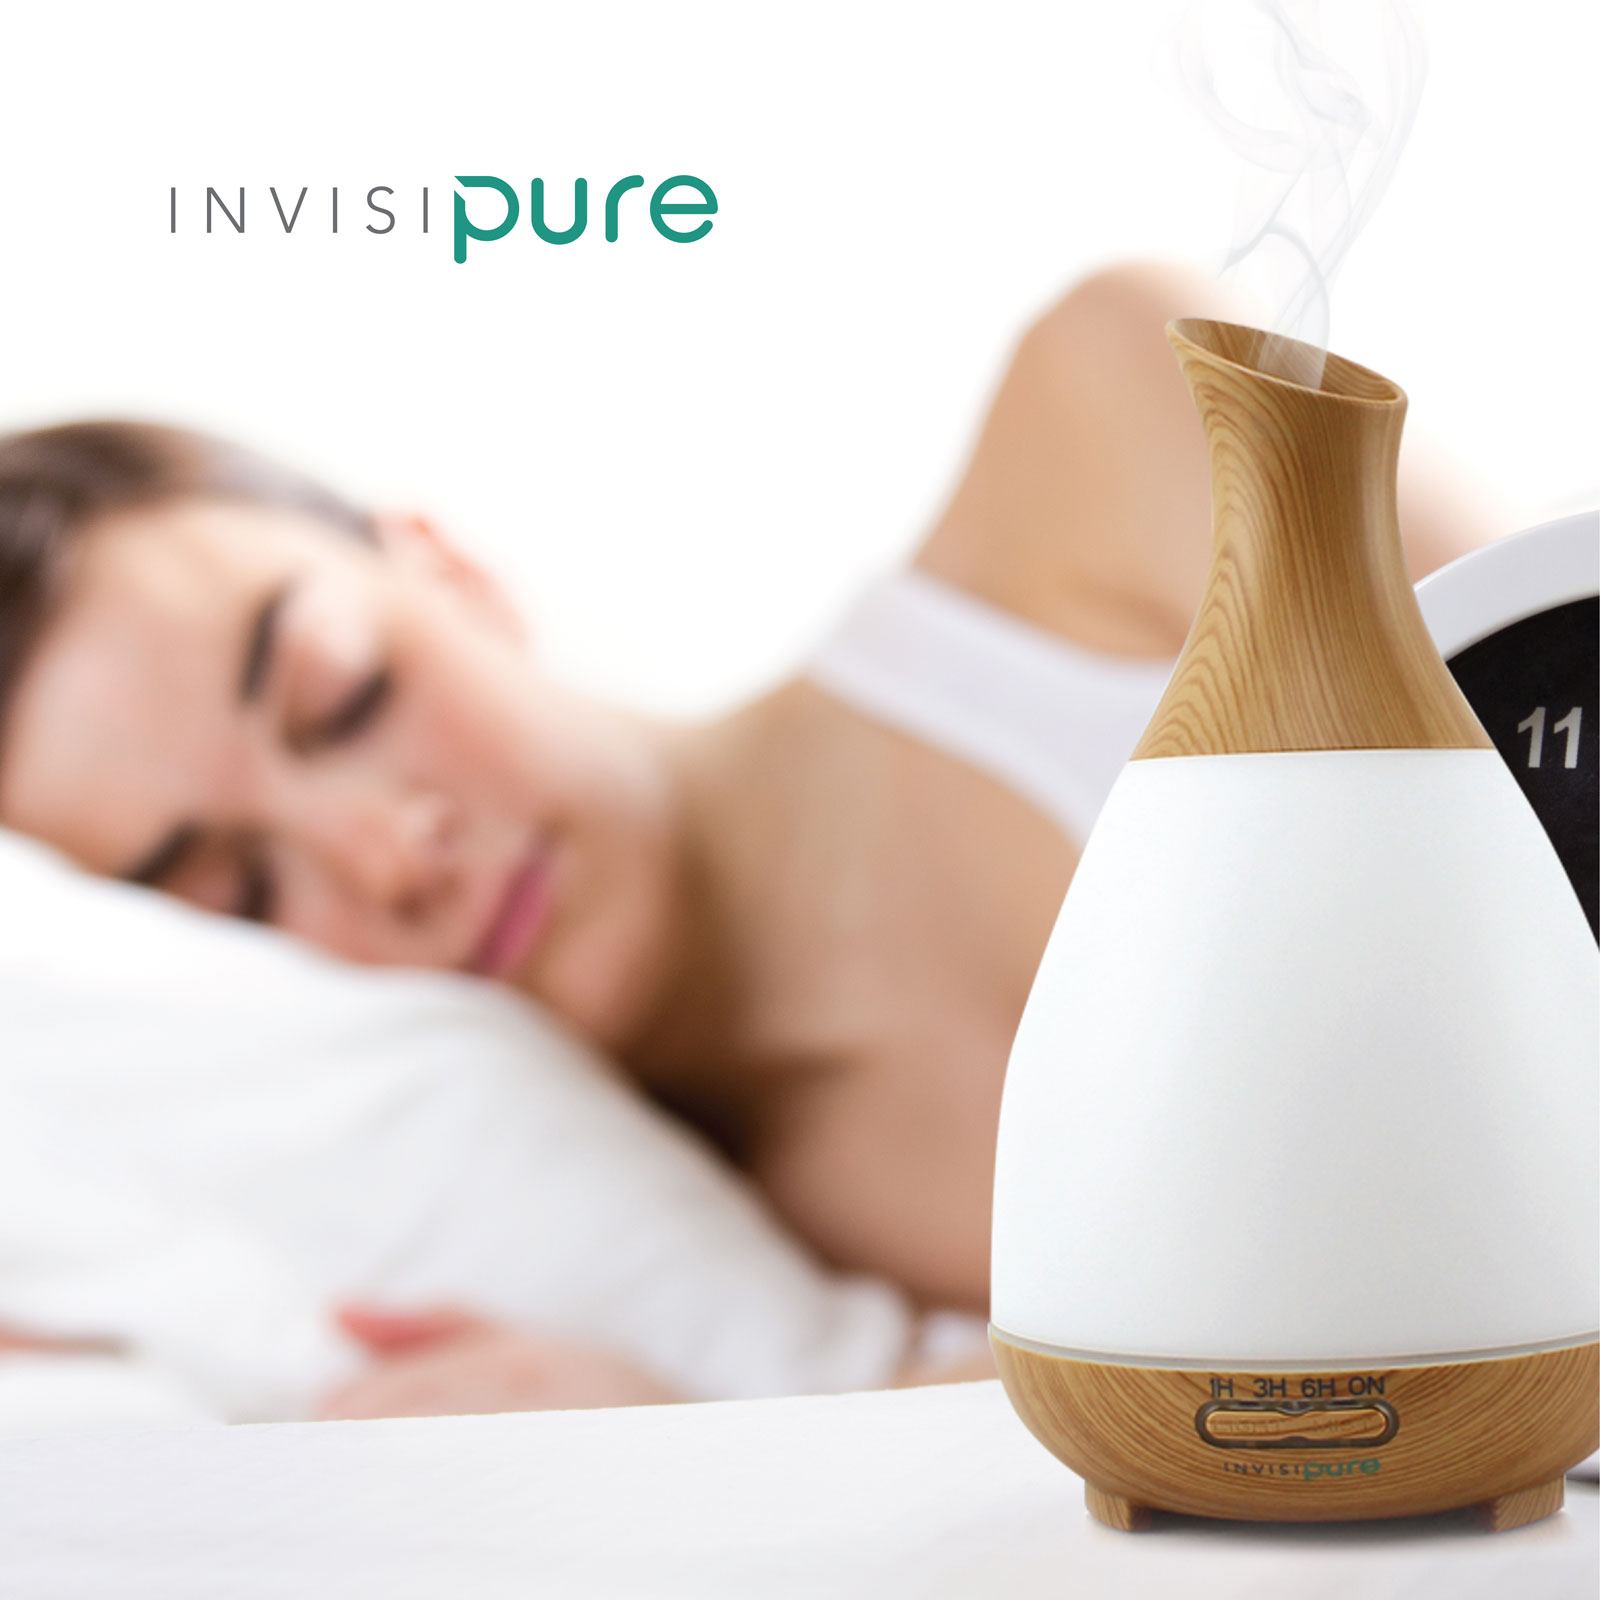 InvisiPure Alta Aromatherapy Diffuser - 200ml - Adjustable Mist, 7 Color LED, and Automatic Shutoff - image 4 of 4